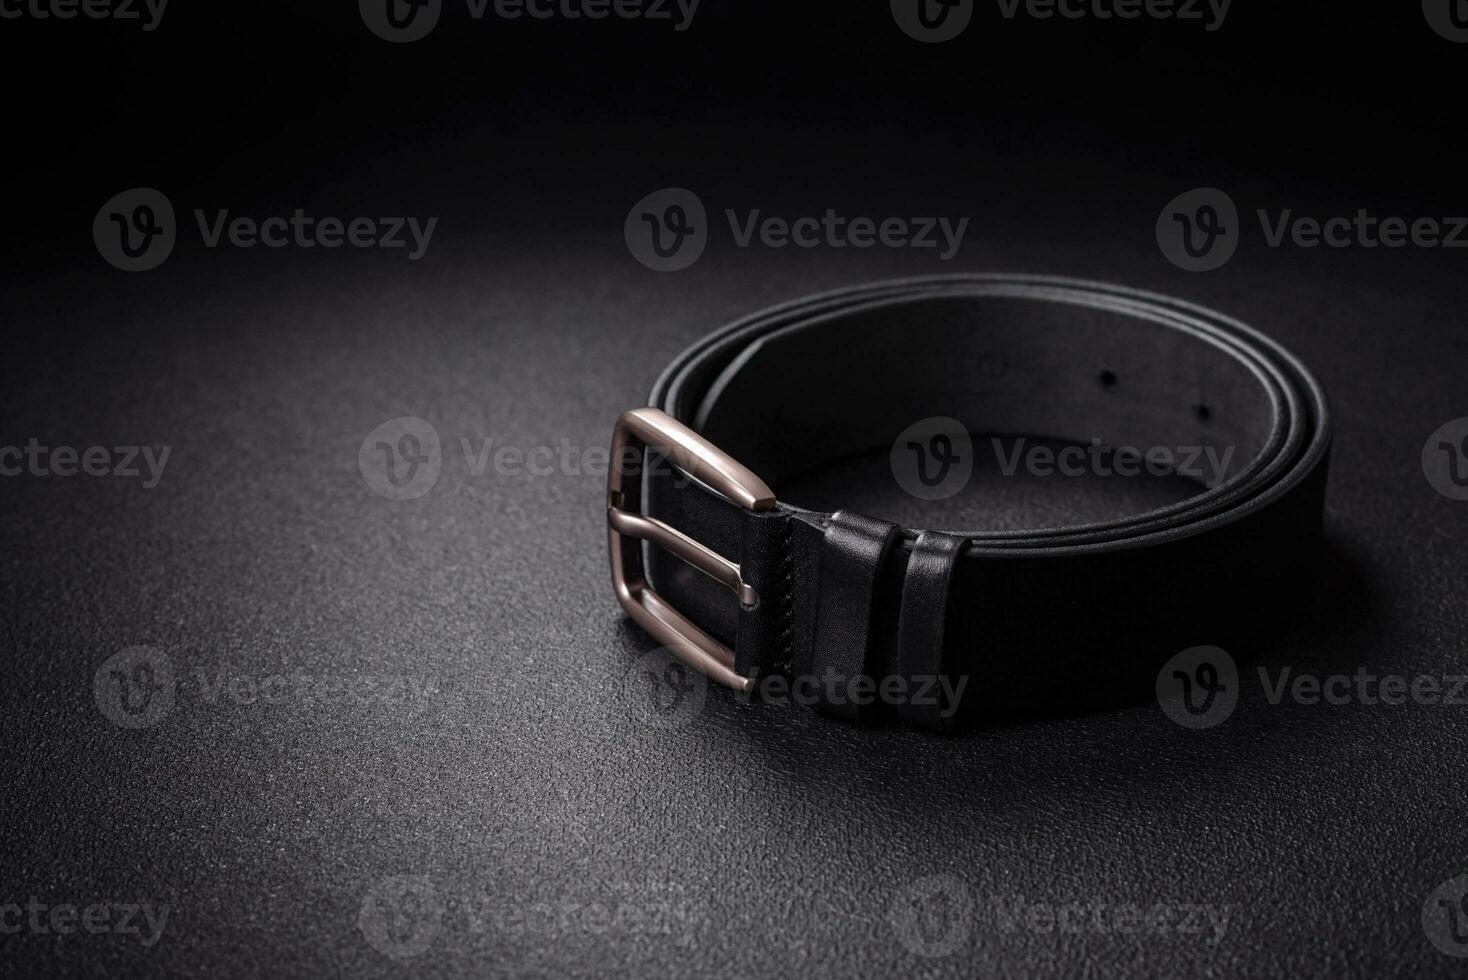 New leather men's belt with an old-style metal buckle photo